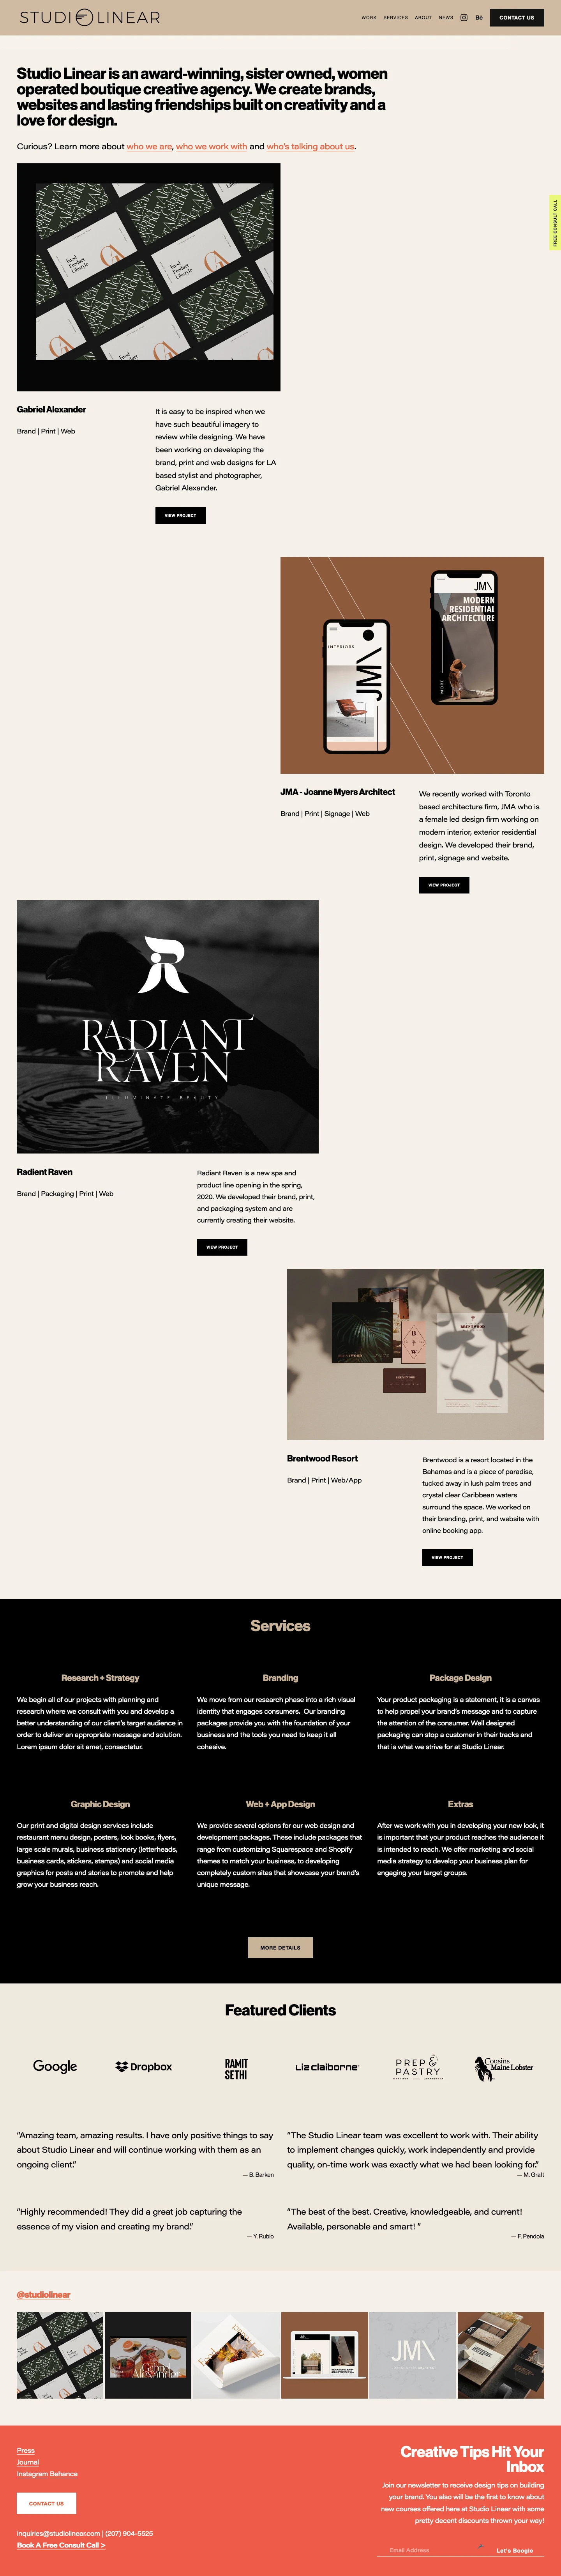 Studio Linear Landing Page Example: Studio Linear is an award-winning, sister owned, women operated boutique creative agency. We create brands, websites and lasting friendships built on creativity and a love for design.